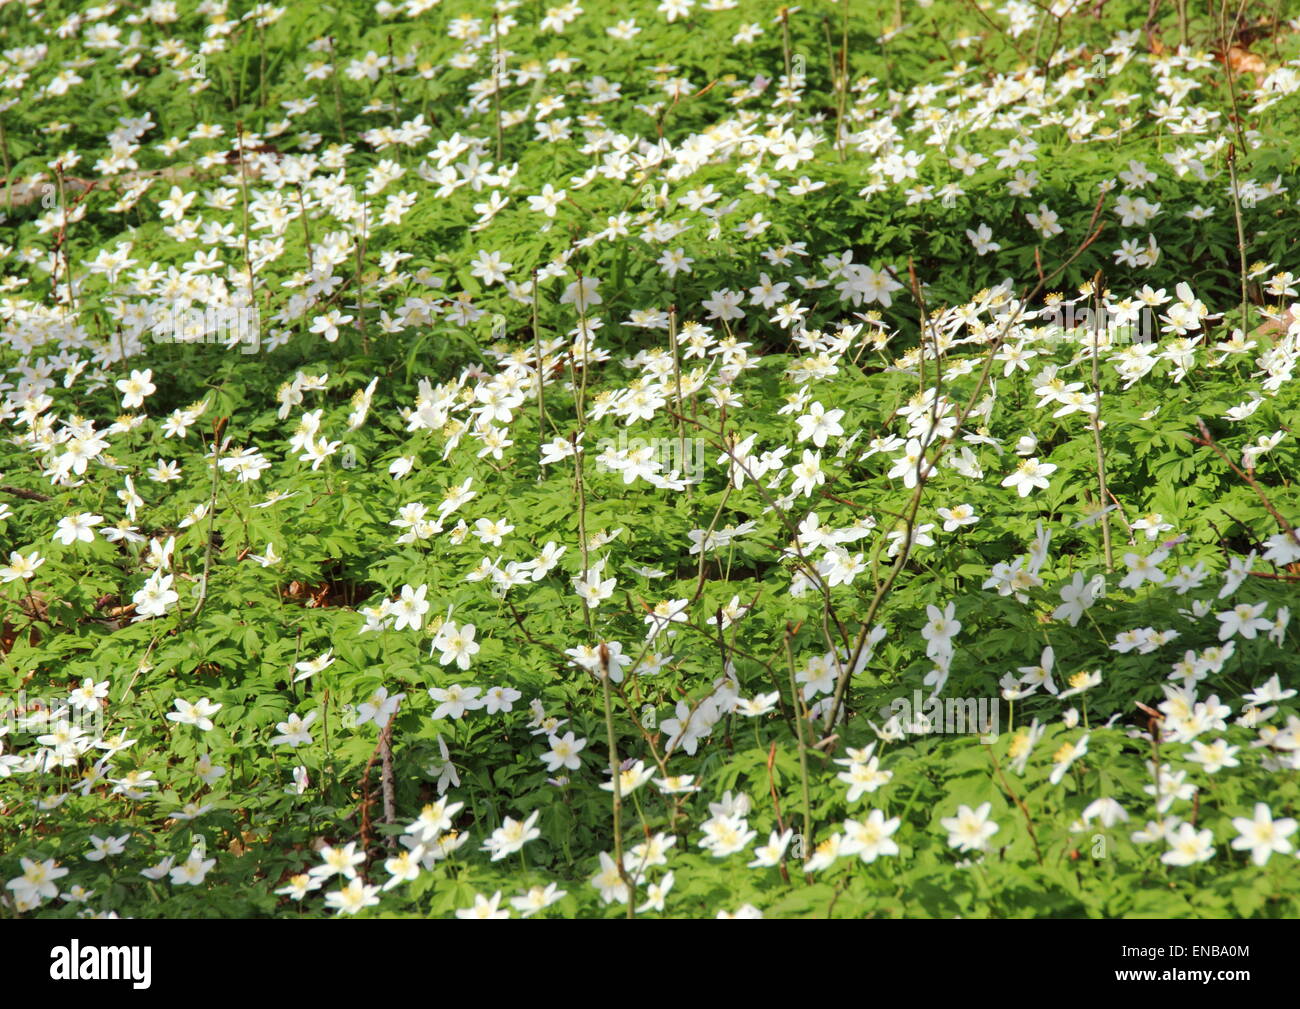 Bed of white windflowers at spring time Stock Photo